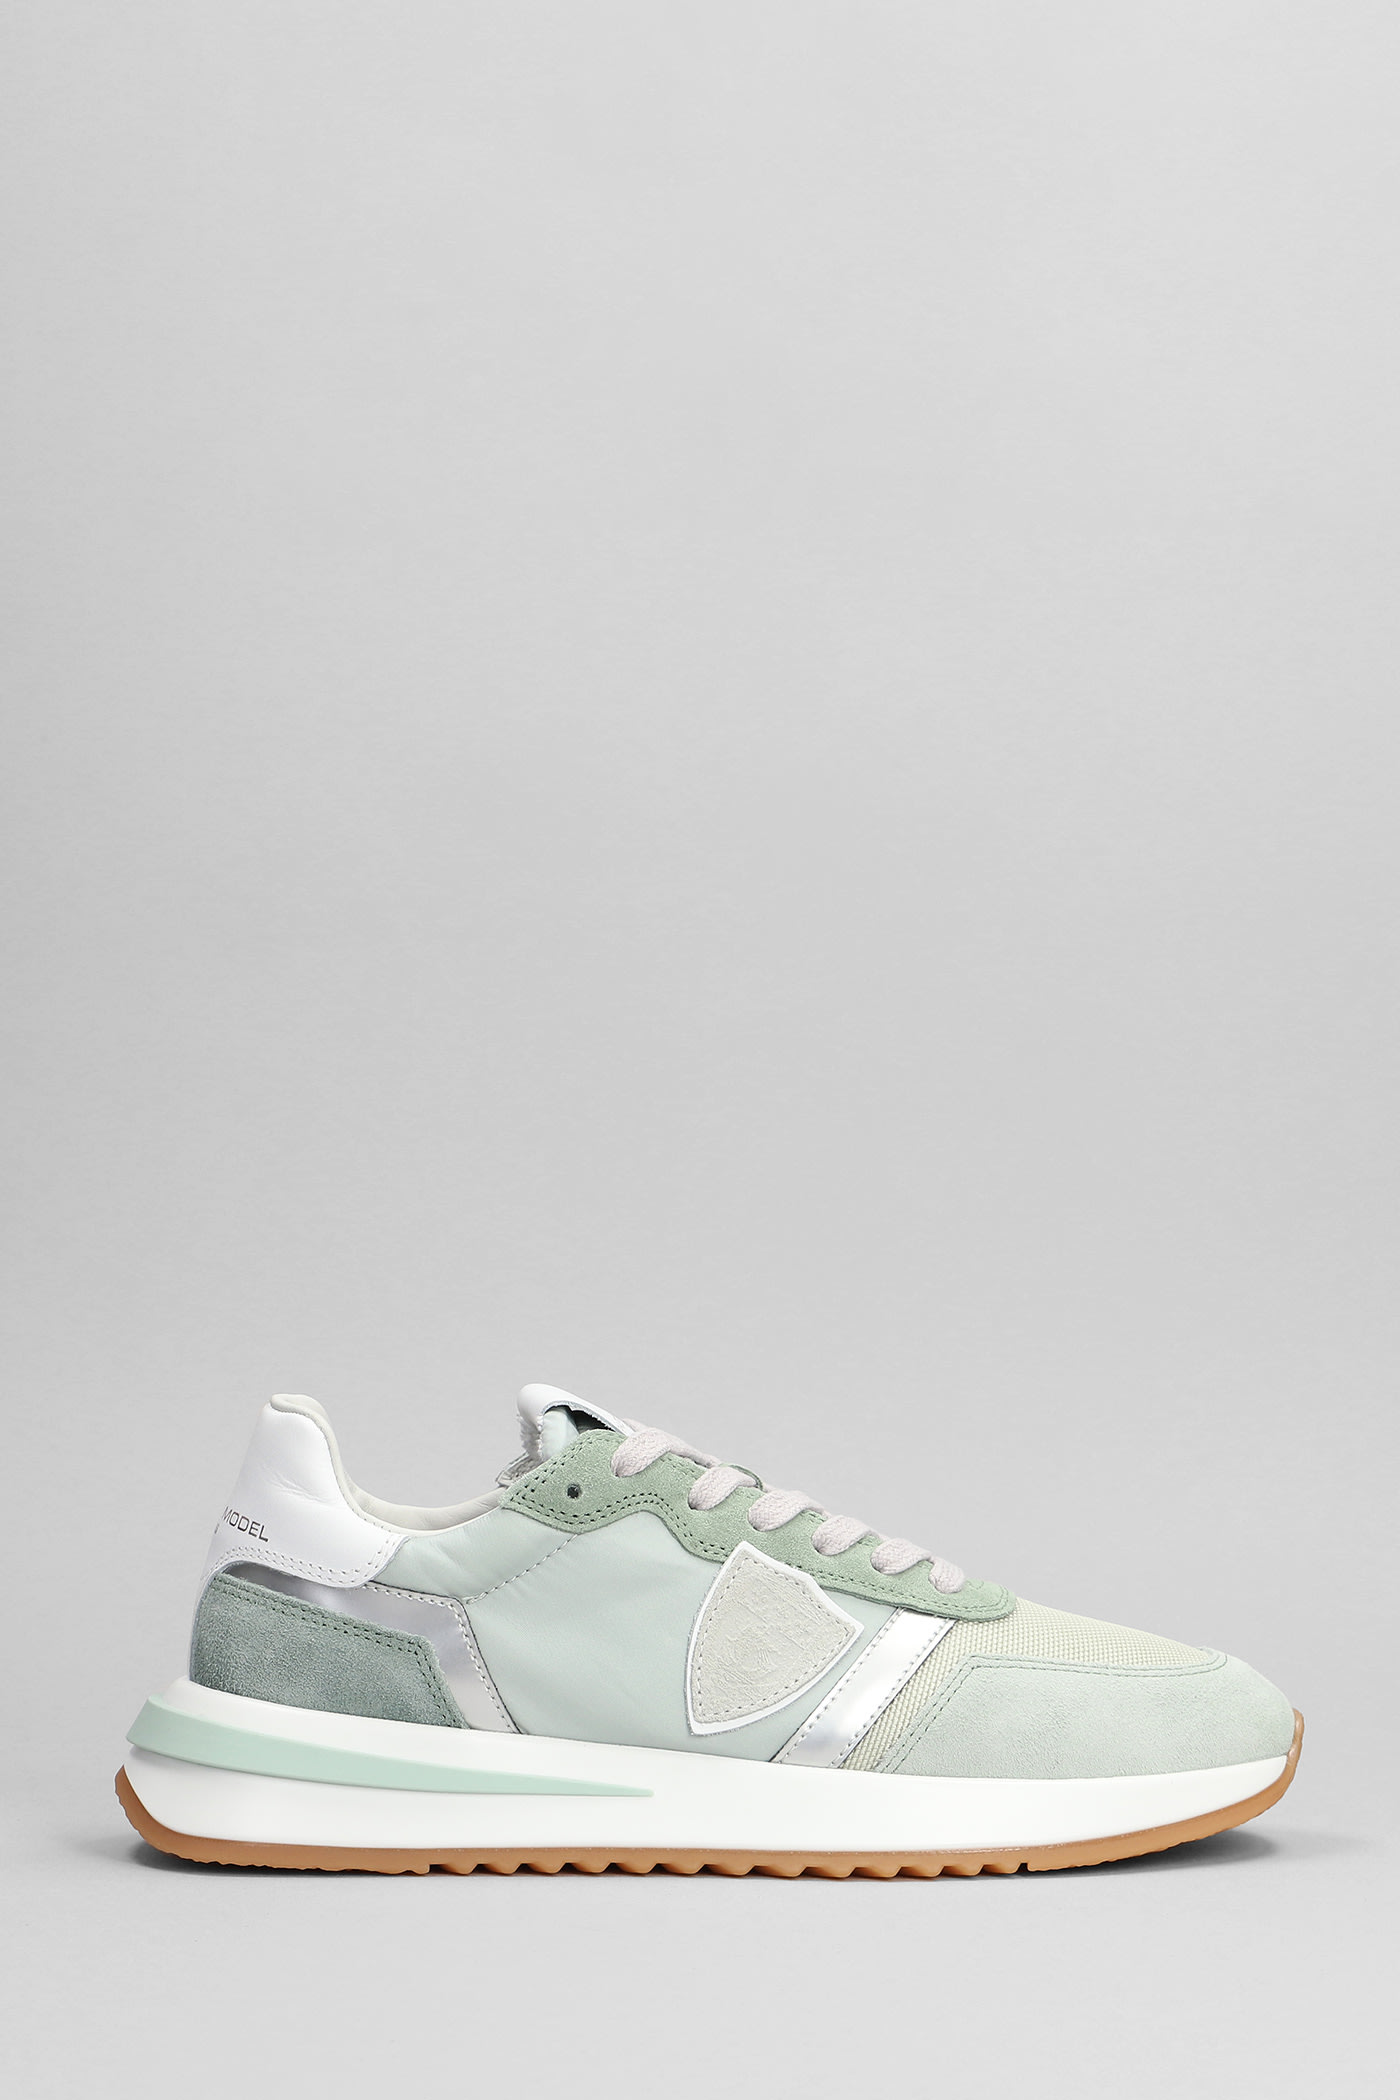 PHILIPPE MODEL TROPEZ 2.1 SNEAKERS IN GREEN SUEDE AND FABRIC